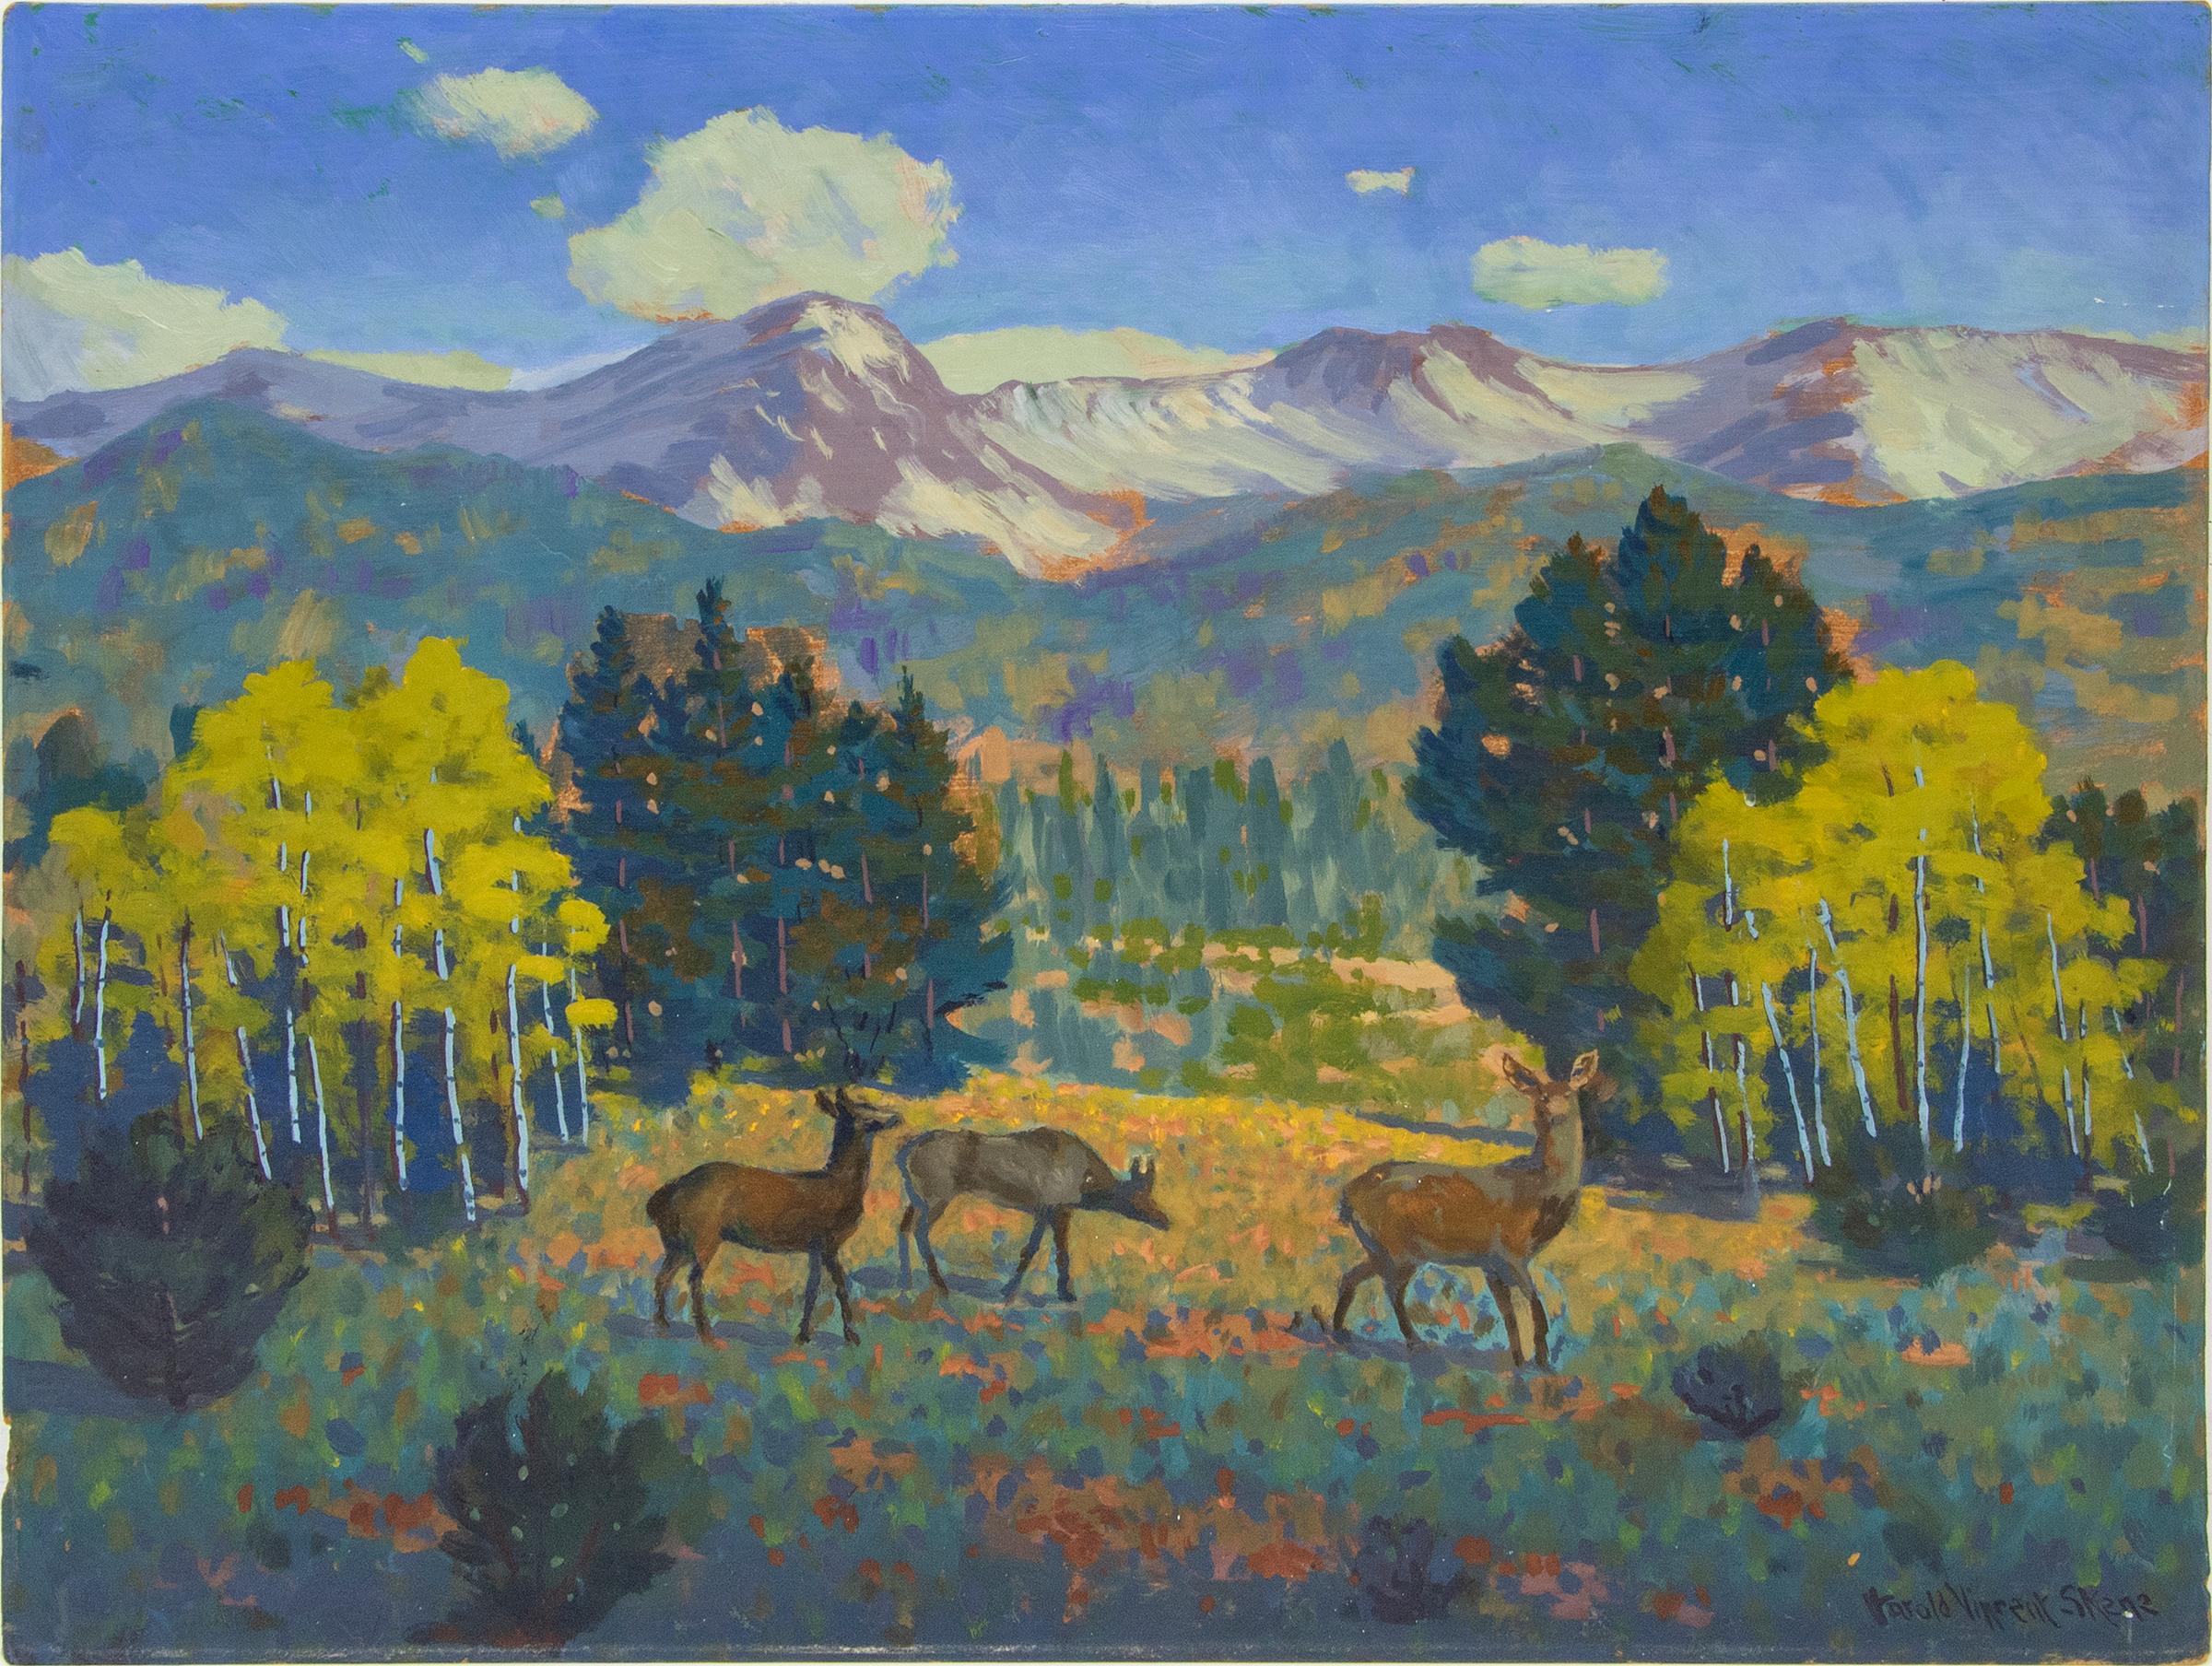 Original vintage 1960s landscape painting with deer grazing in a meadow in Yellowstone National Park, Wyoming by Harold Skene (1883-1978). Golden Aspen Trees in autumn foliage with pine trees and snow capped mountains under a blue sky.  Signed and